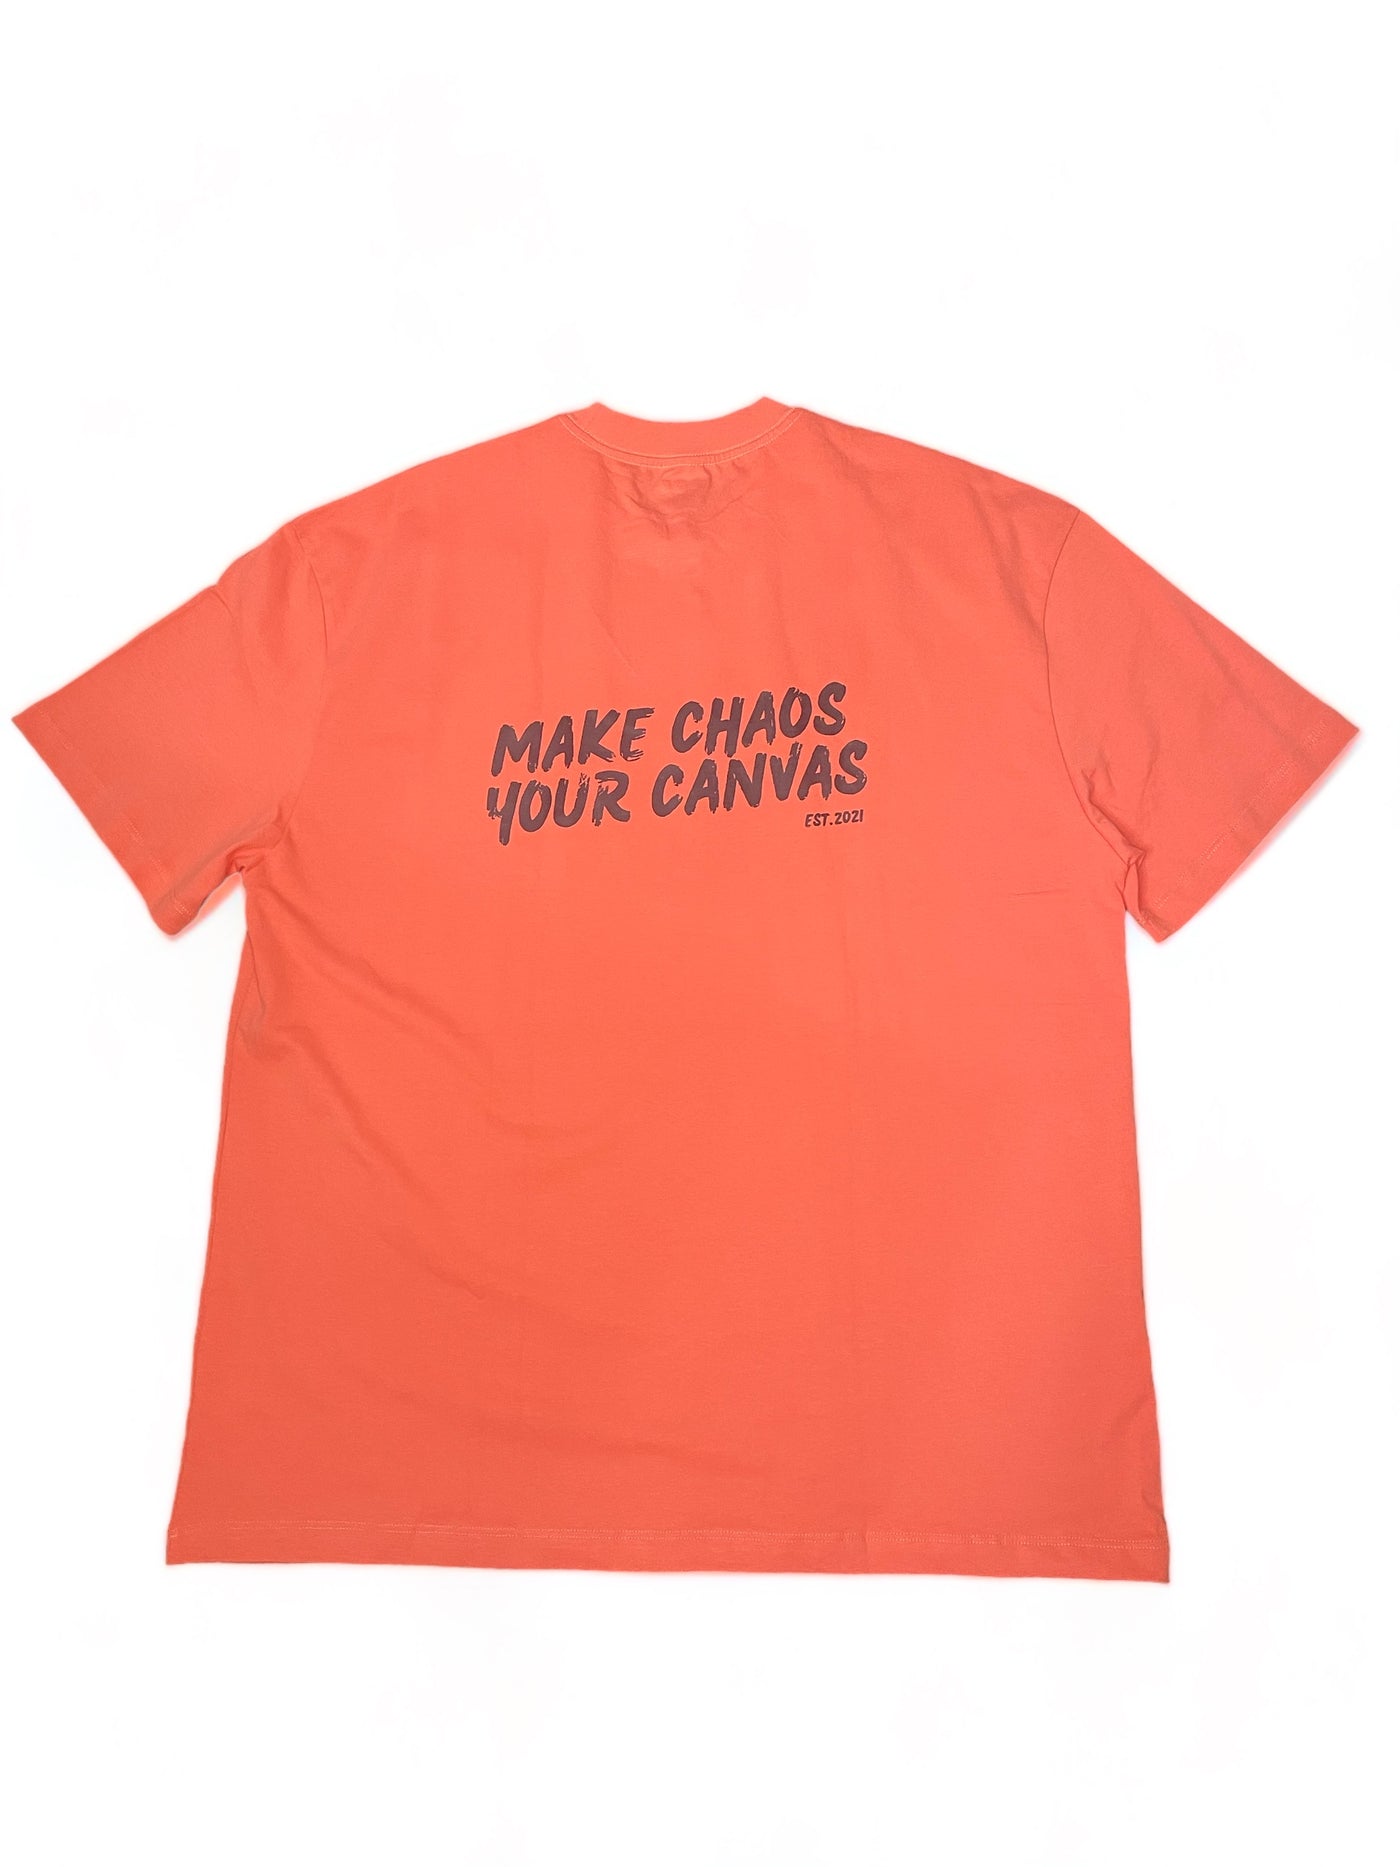 “Chaos” Over-Sized Tee